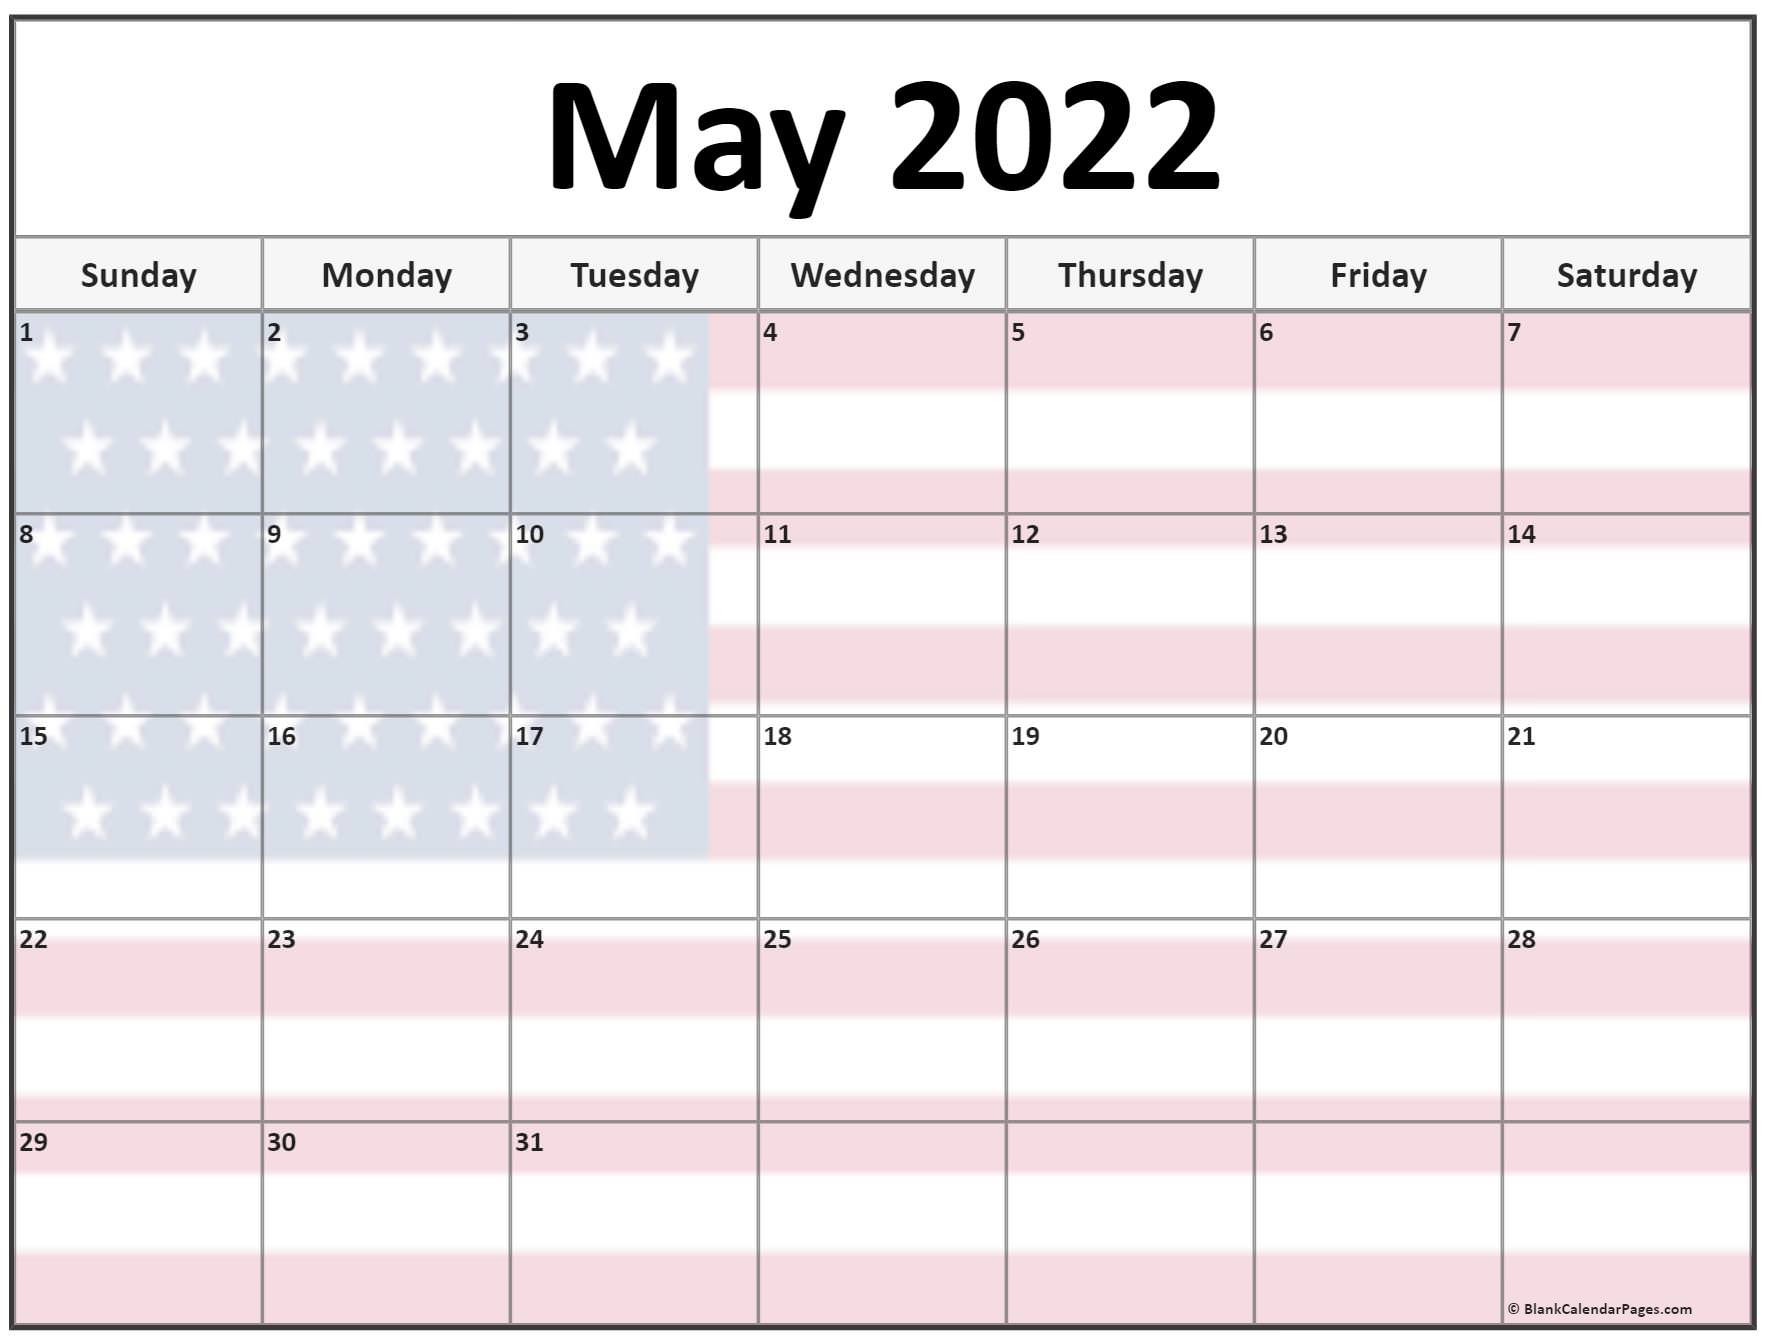 Collection Of May 2022 Photo Calendars With Image Filters.  Printable Calendar 2022 Usa